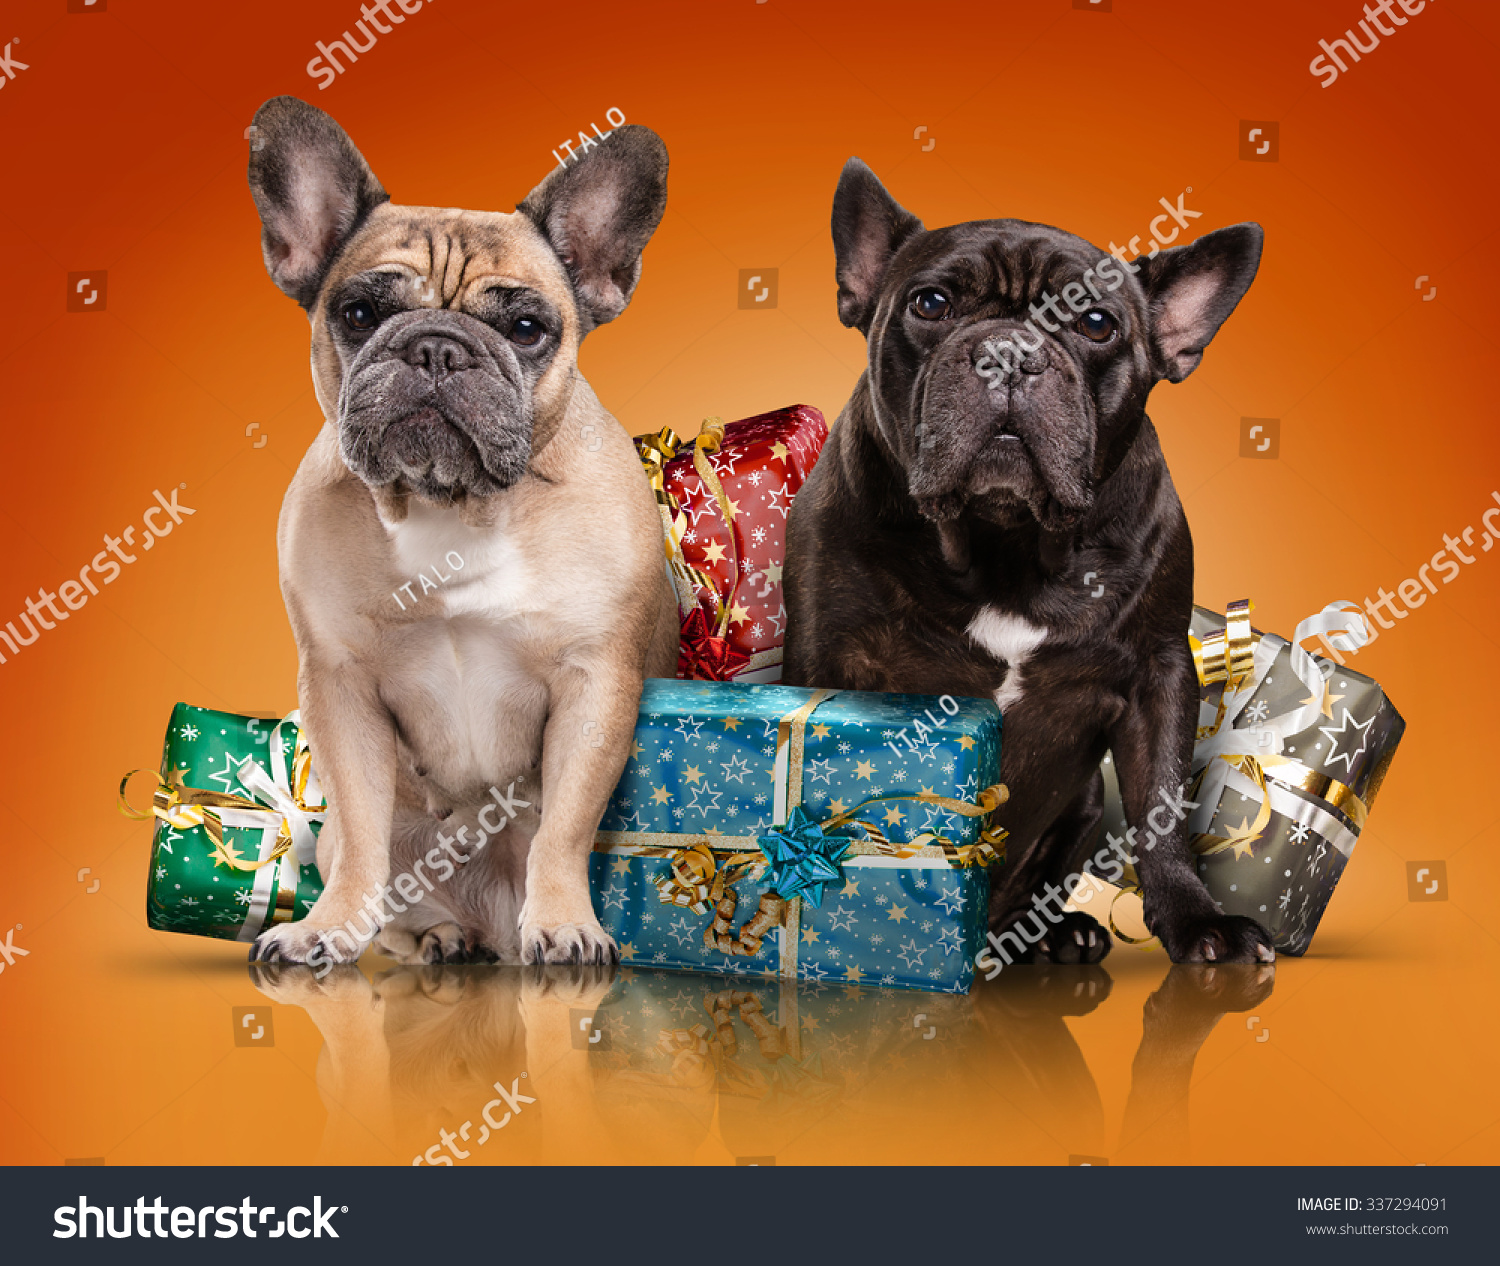 48 Top Images French Bulldog Gifts For Christmas : Cute Sitting French Bulldog Puppy With Christmas Gifts Stock Image Image Of Golden Doggy 165836017